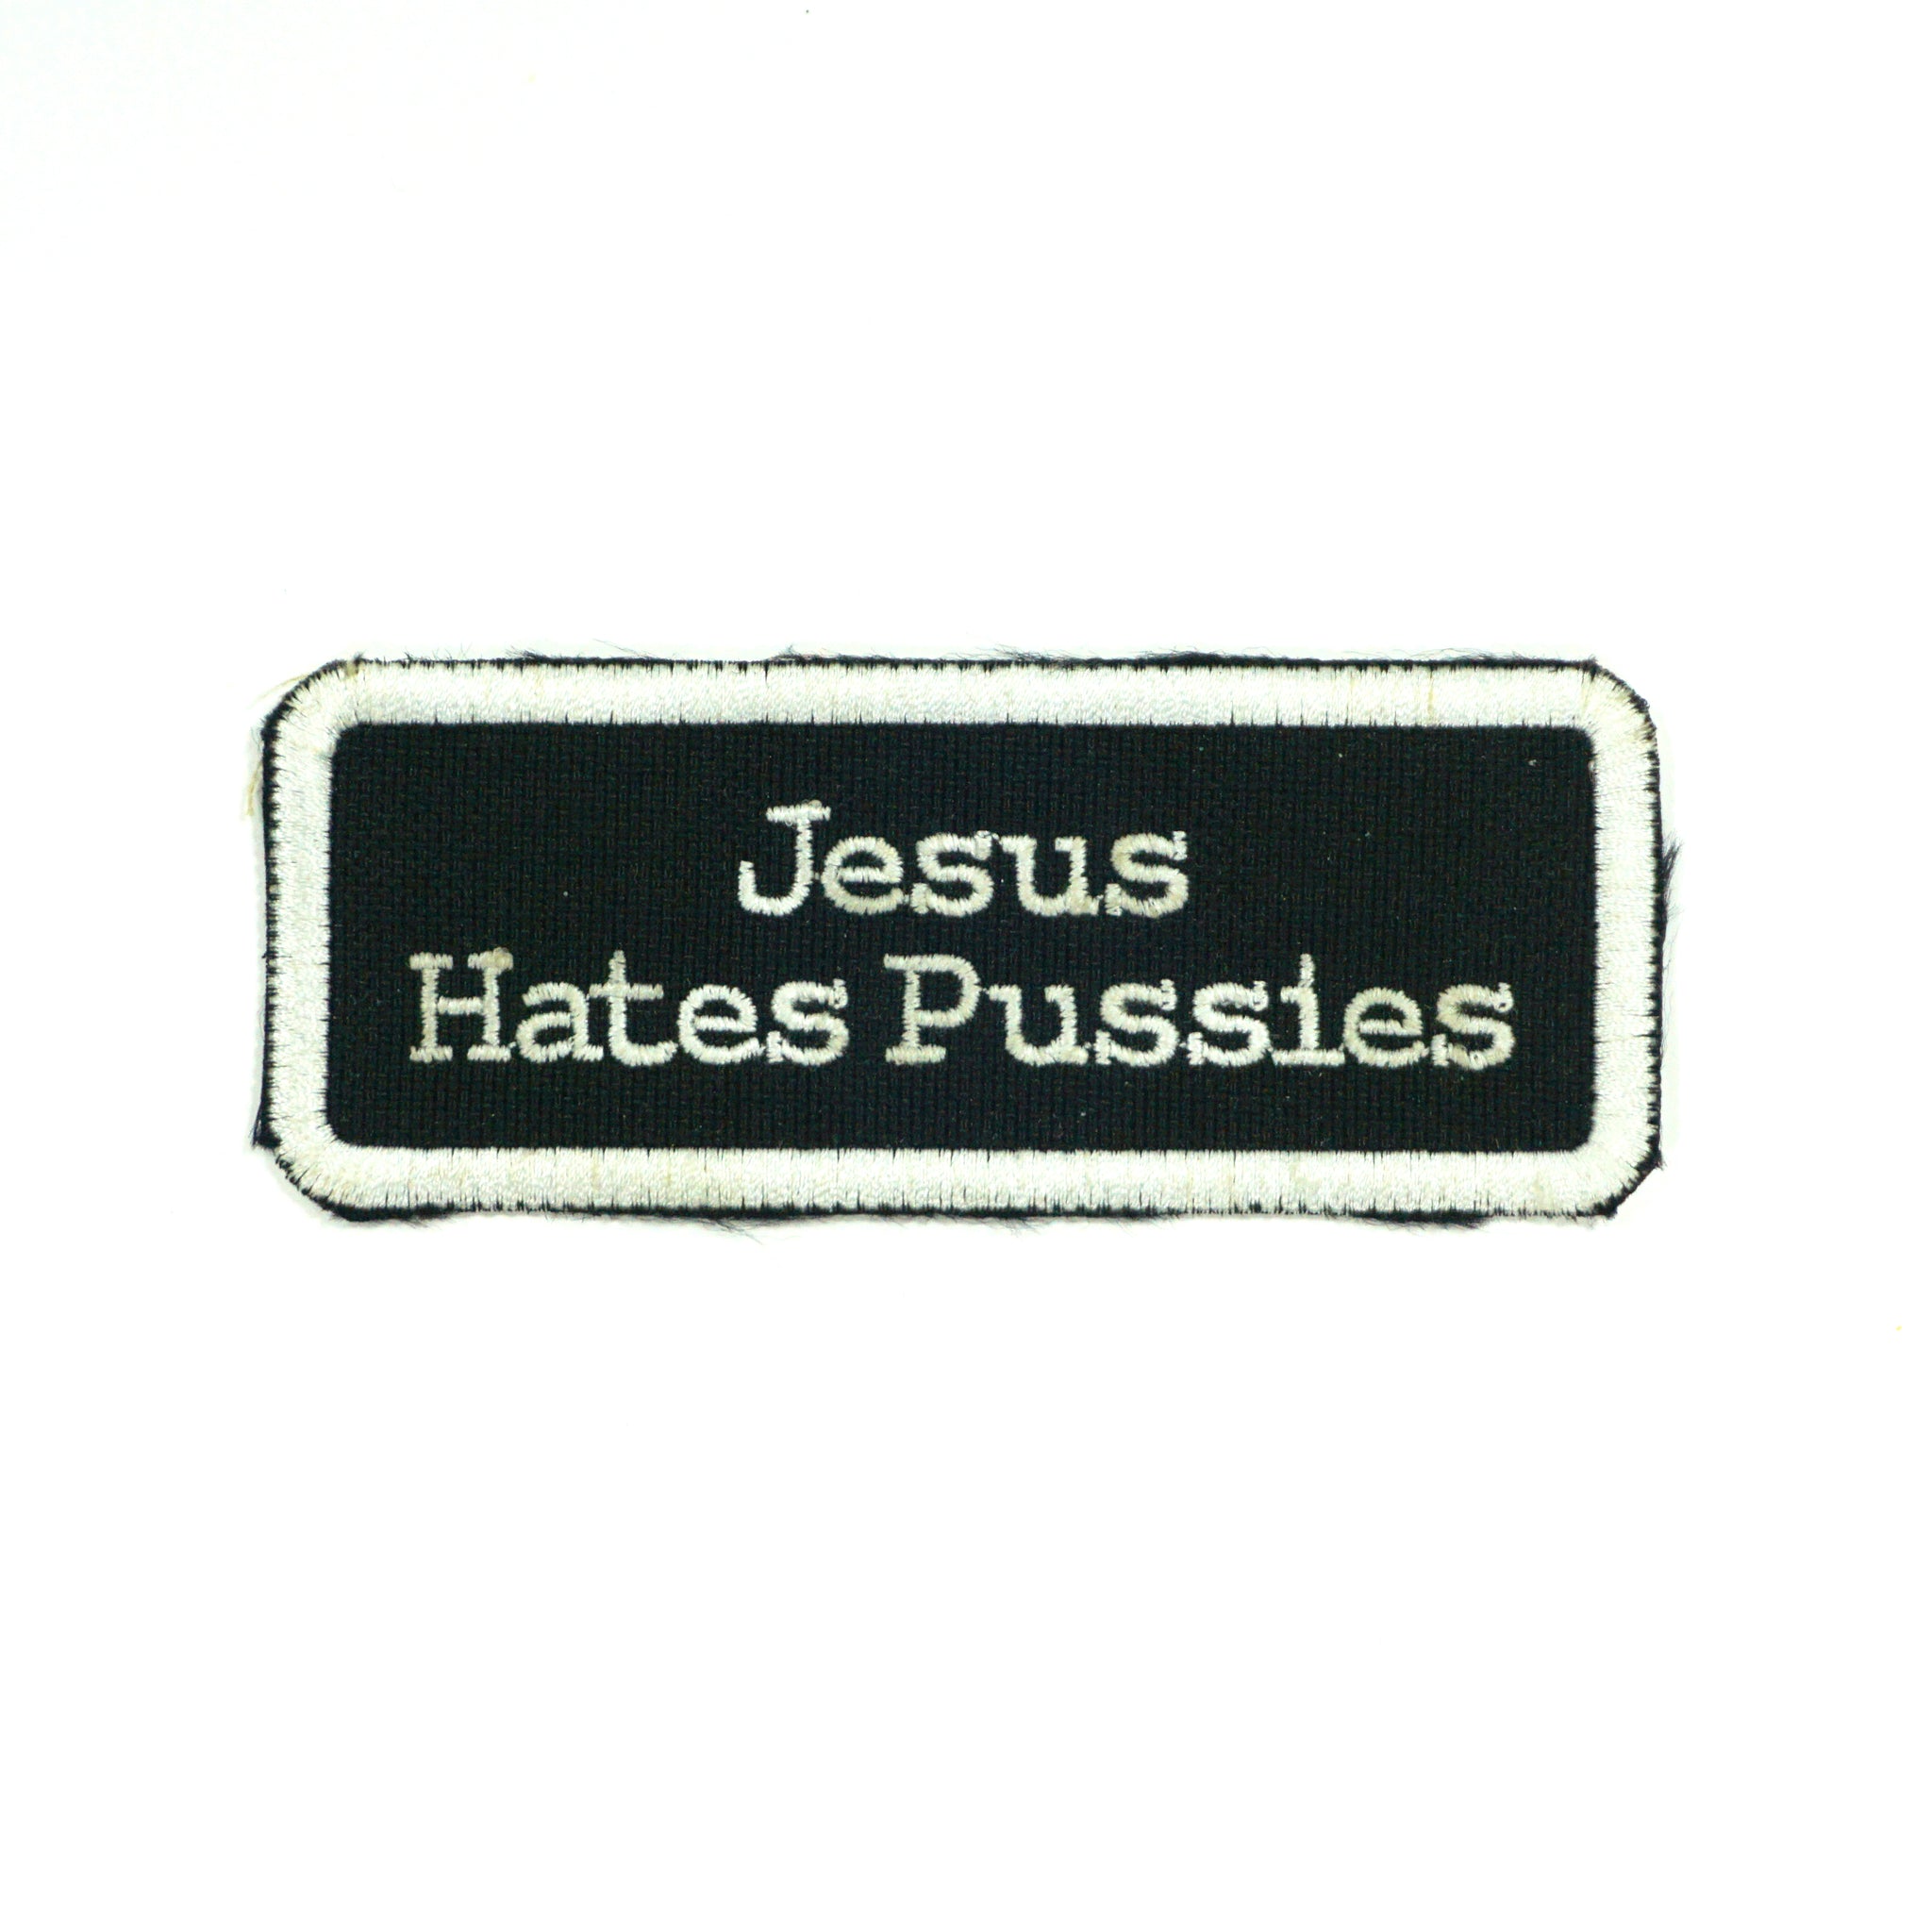 Shitluck - Jesus Hates Pussies Patch